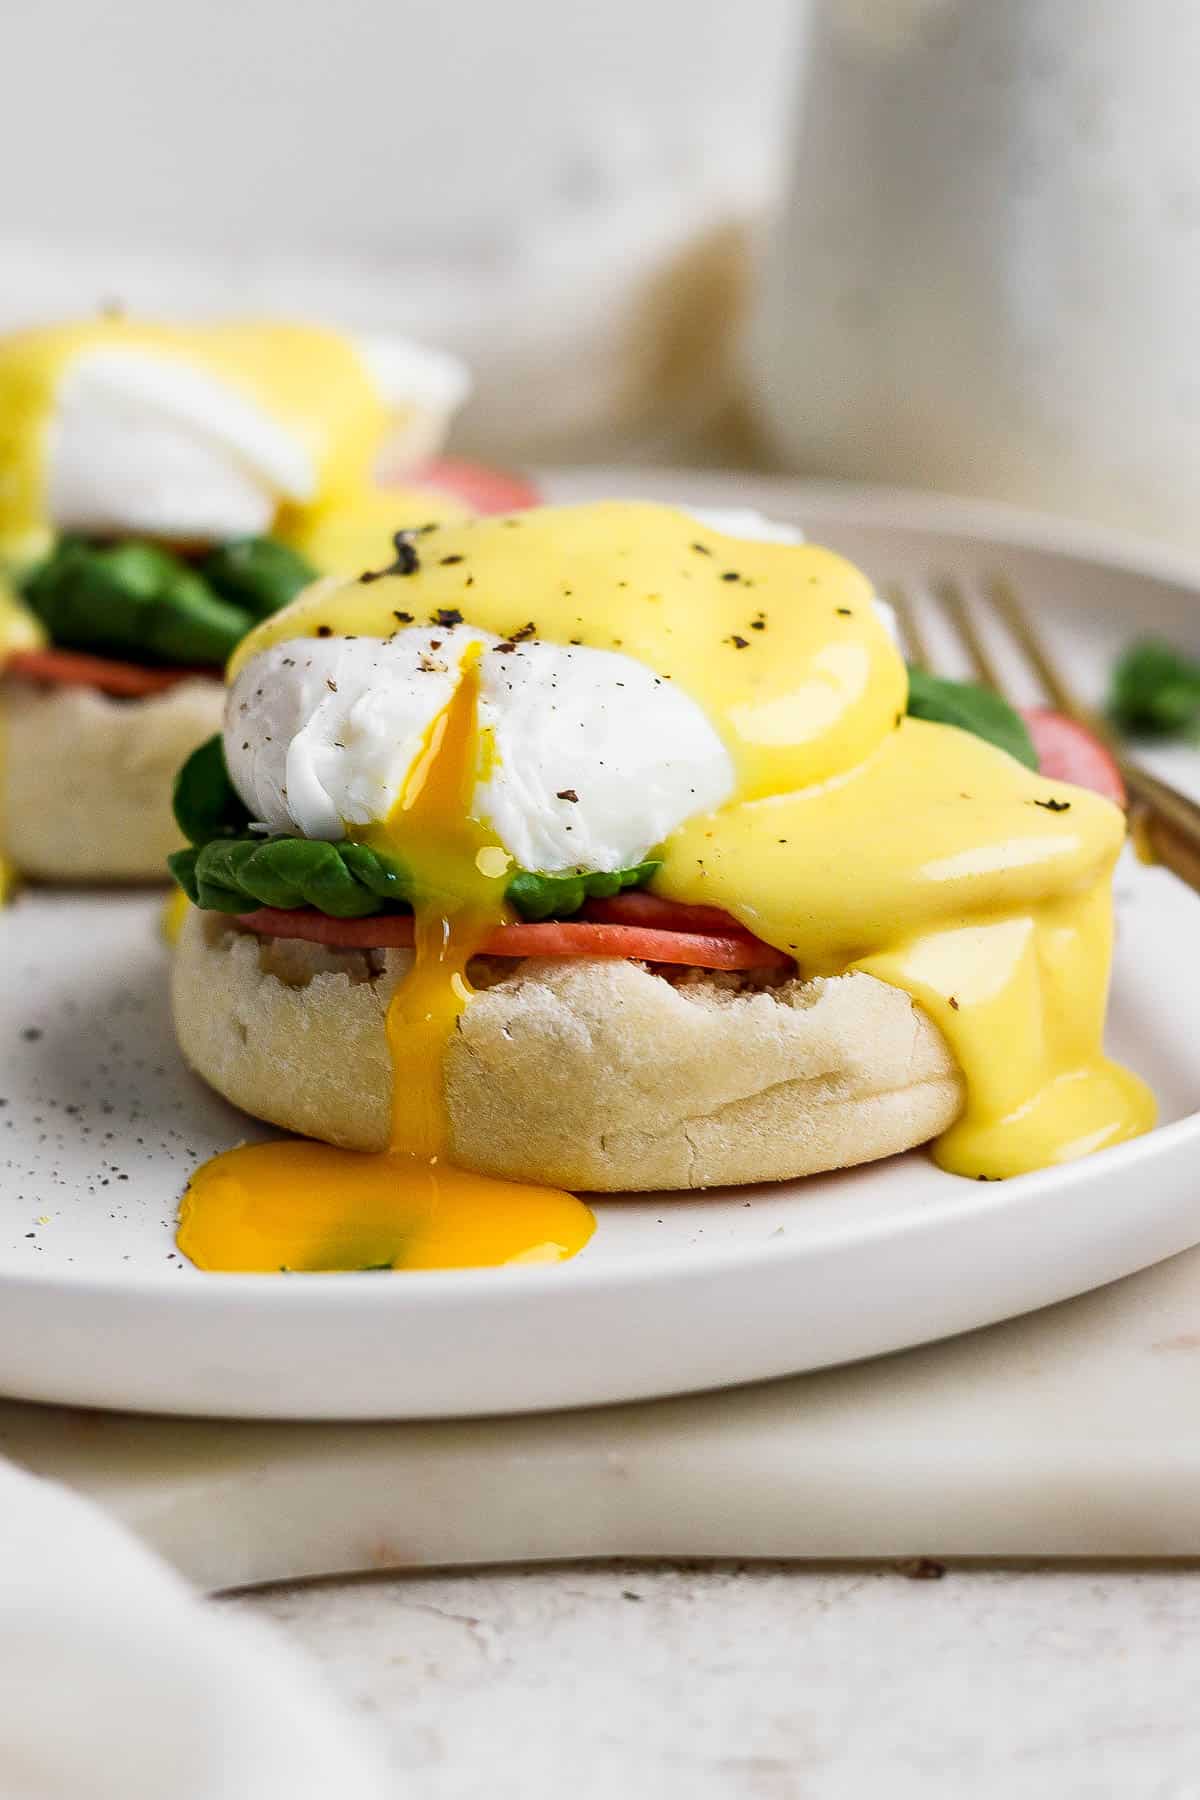 Hollandaise sauce over some eggs benedict.